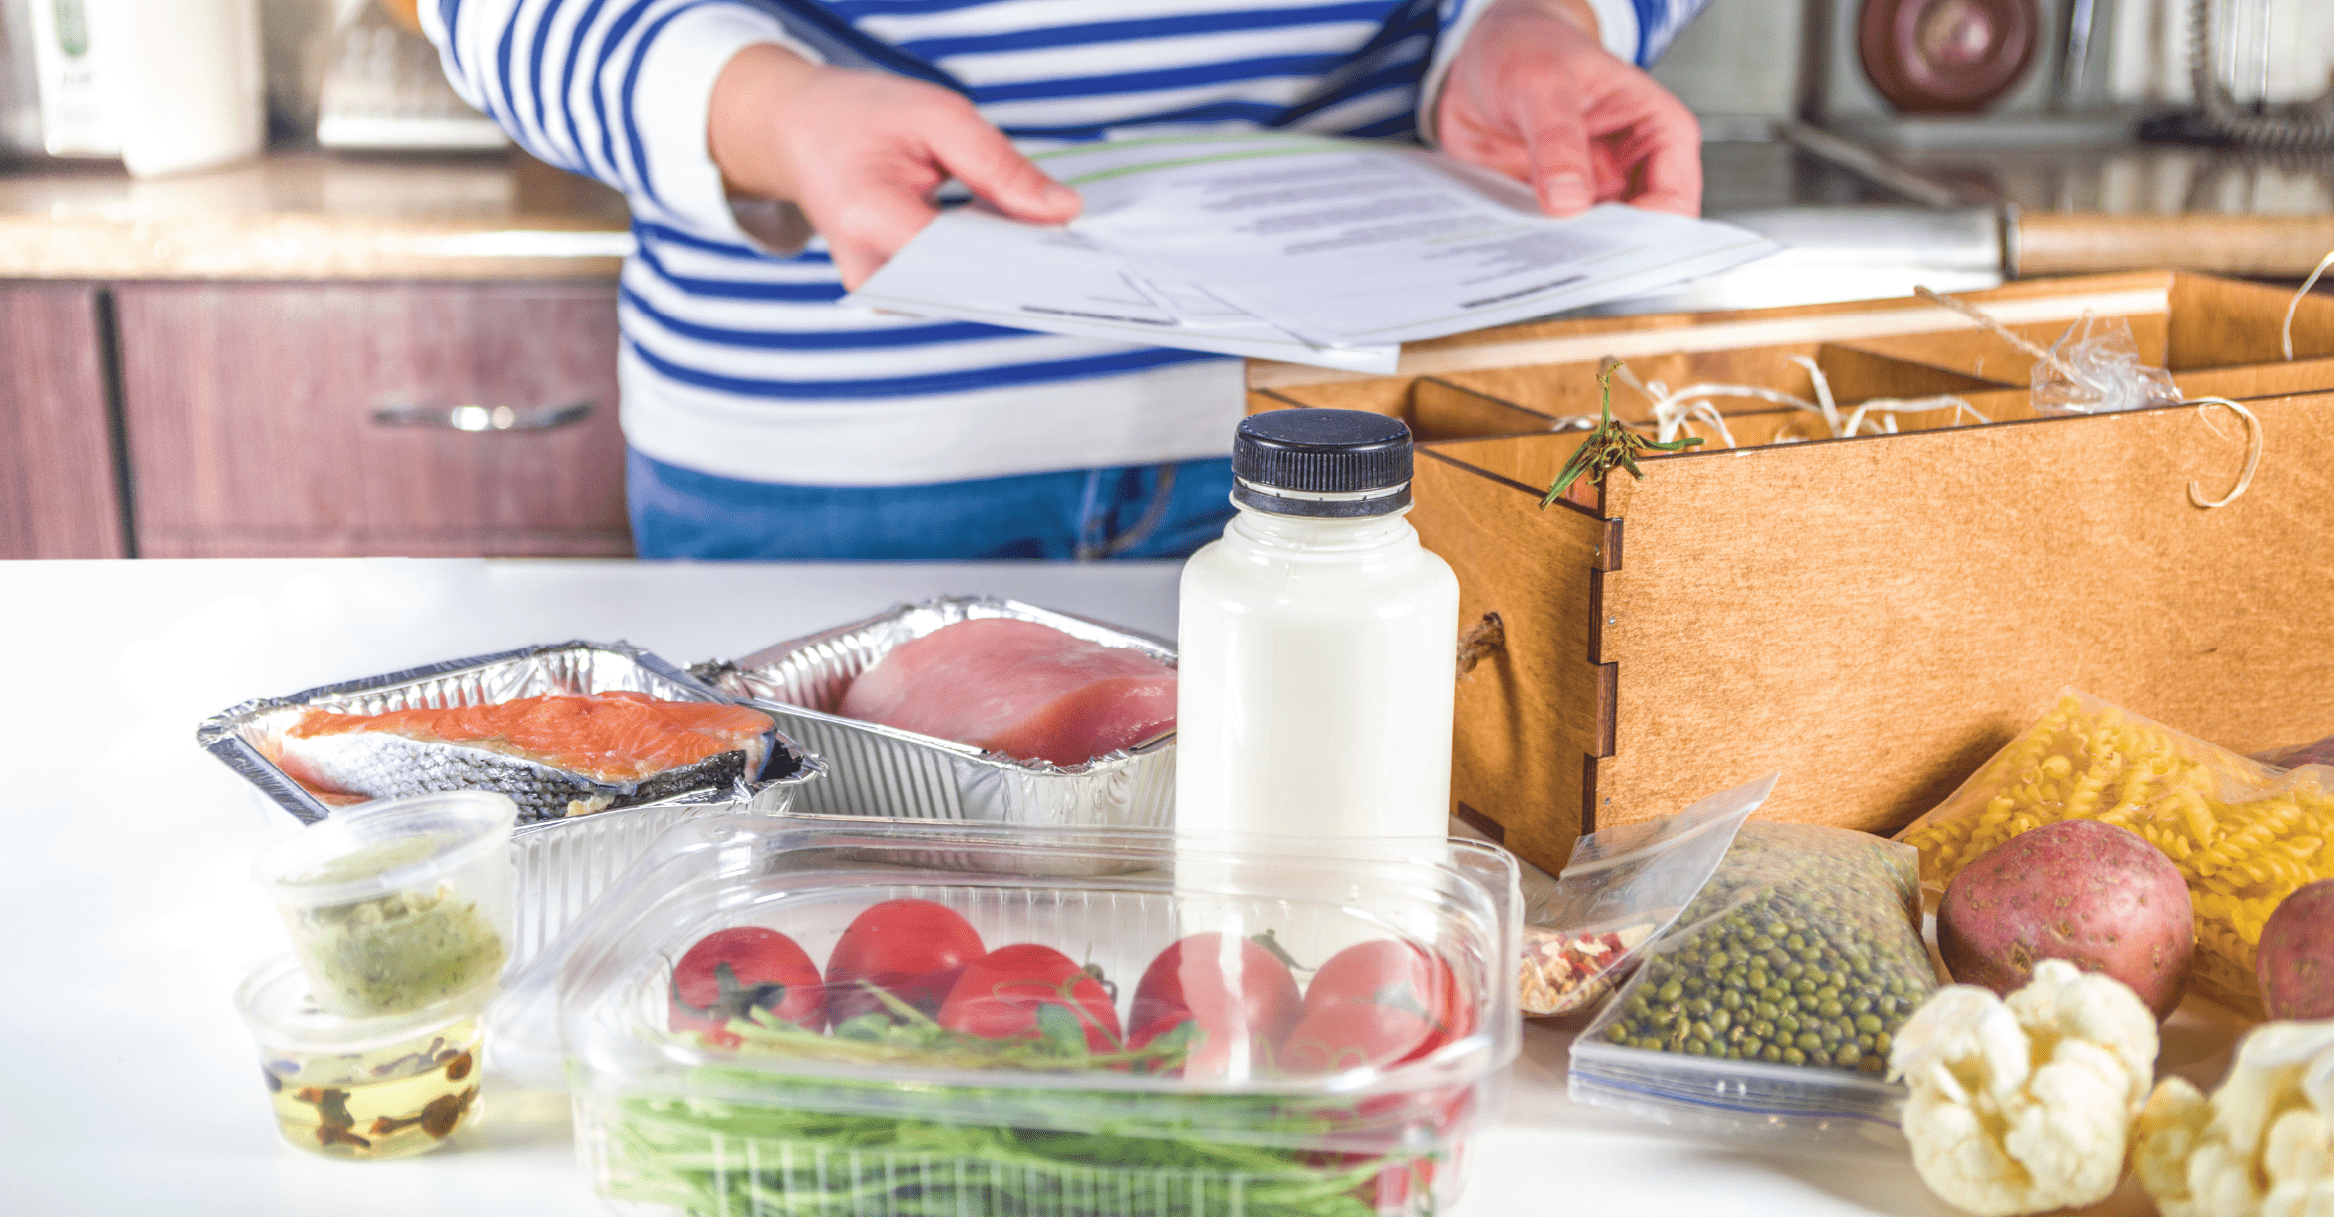 Meal kits make cooking at home a snap during coronavirus outbreak 